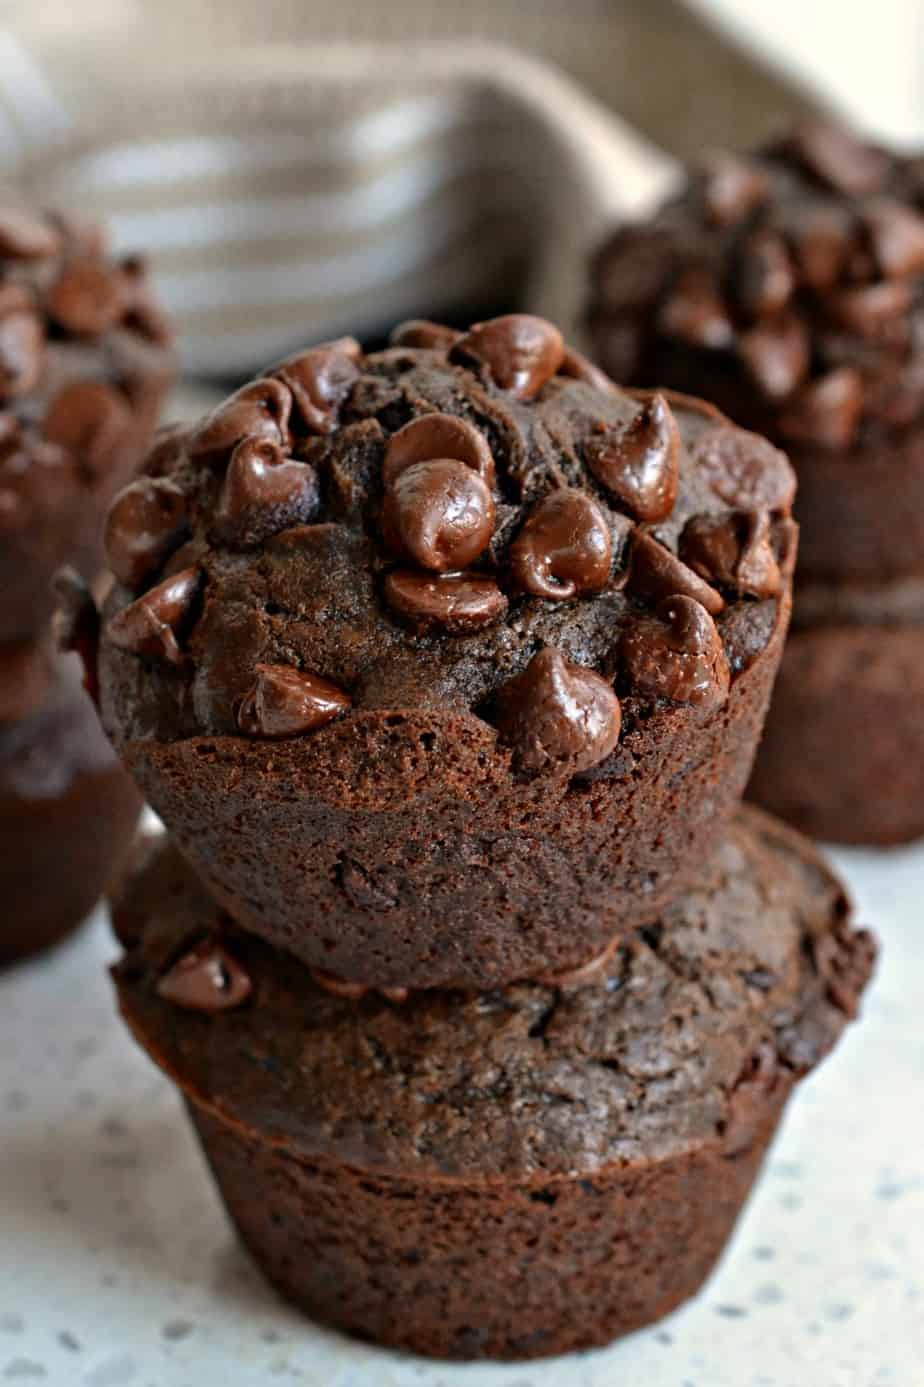 These double chocolate chip muffins are a decadent, sweet treat